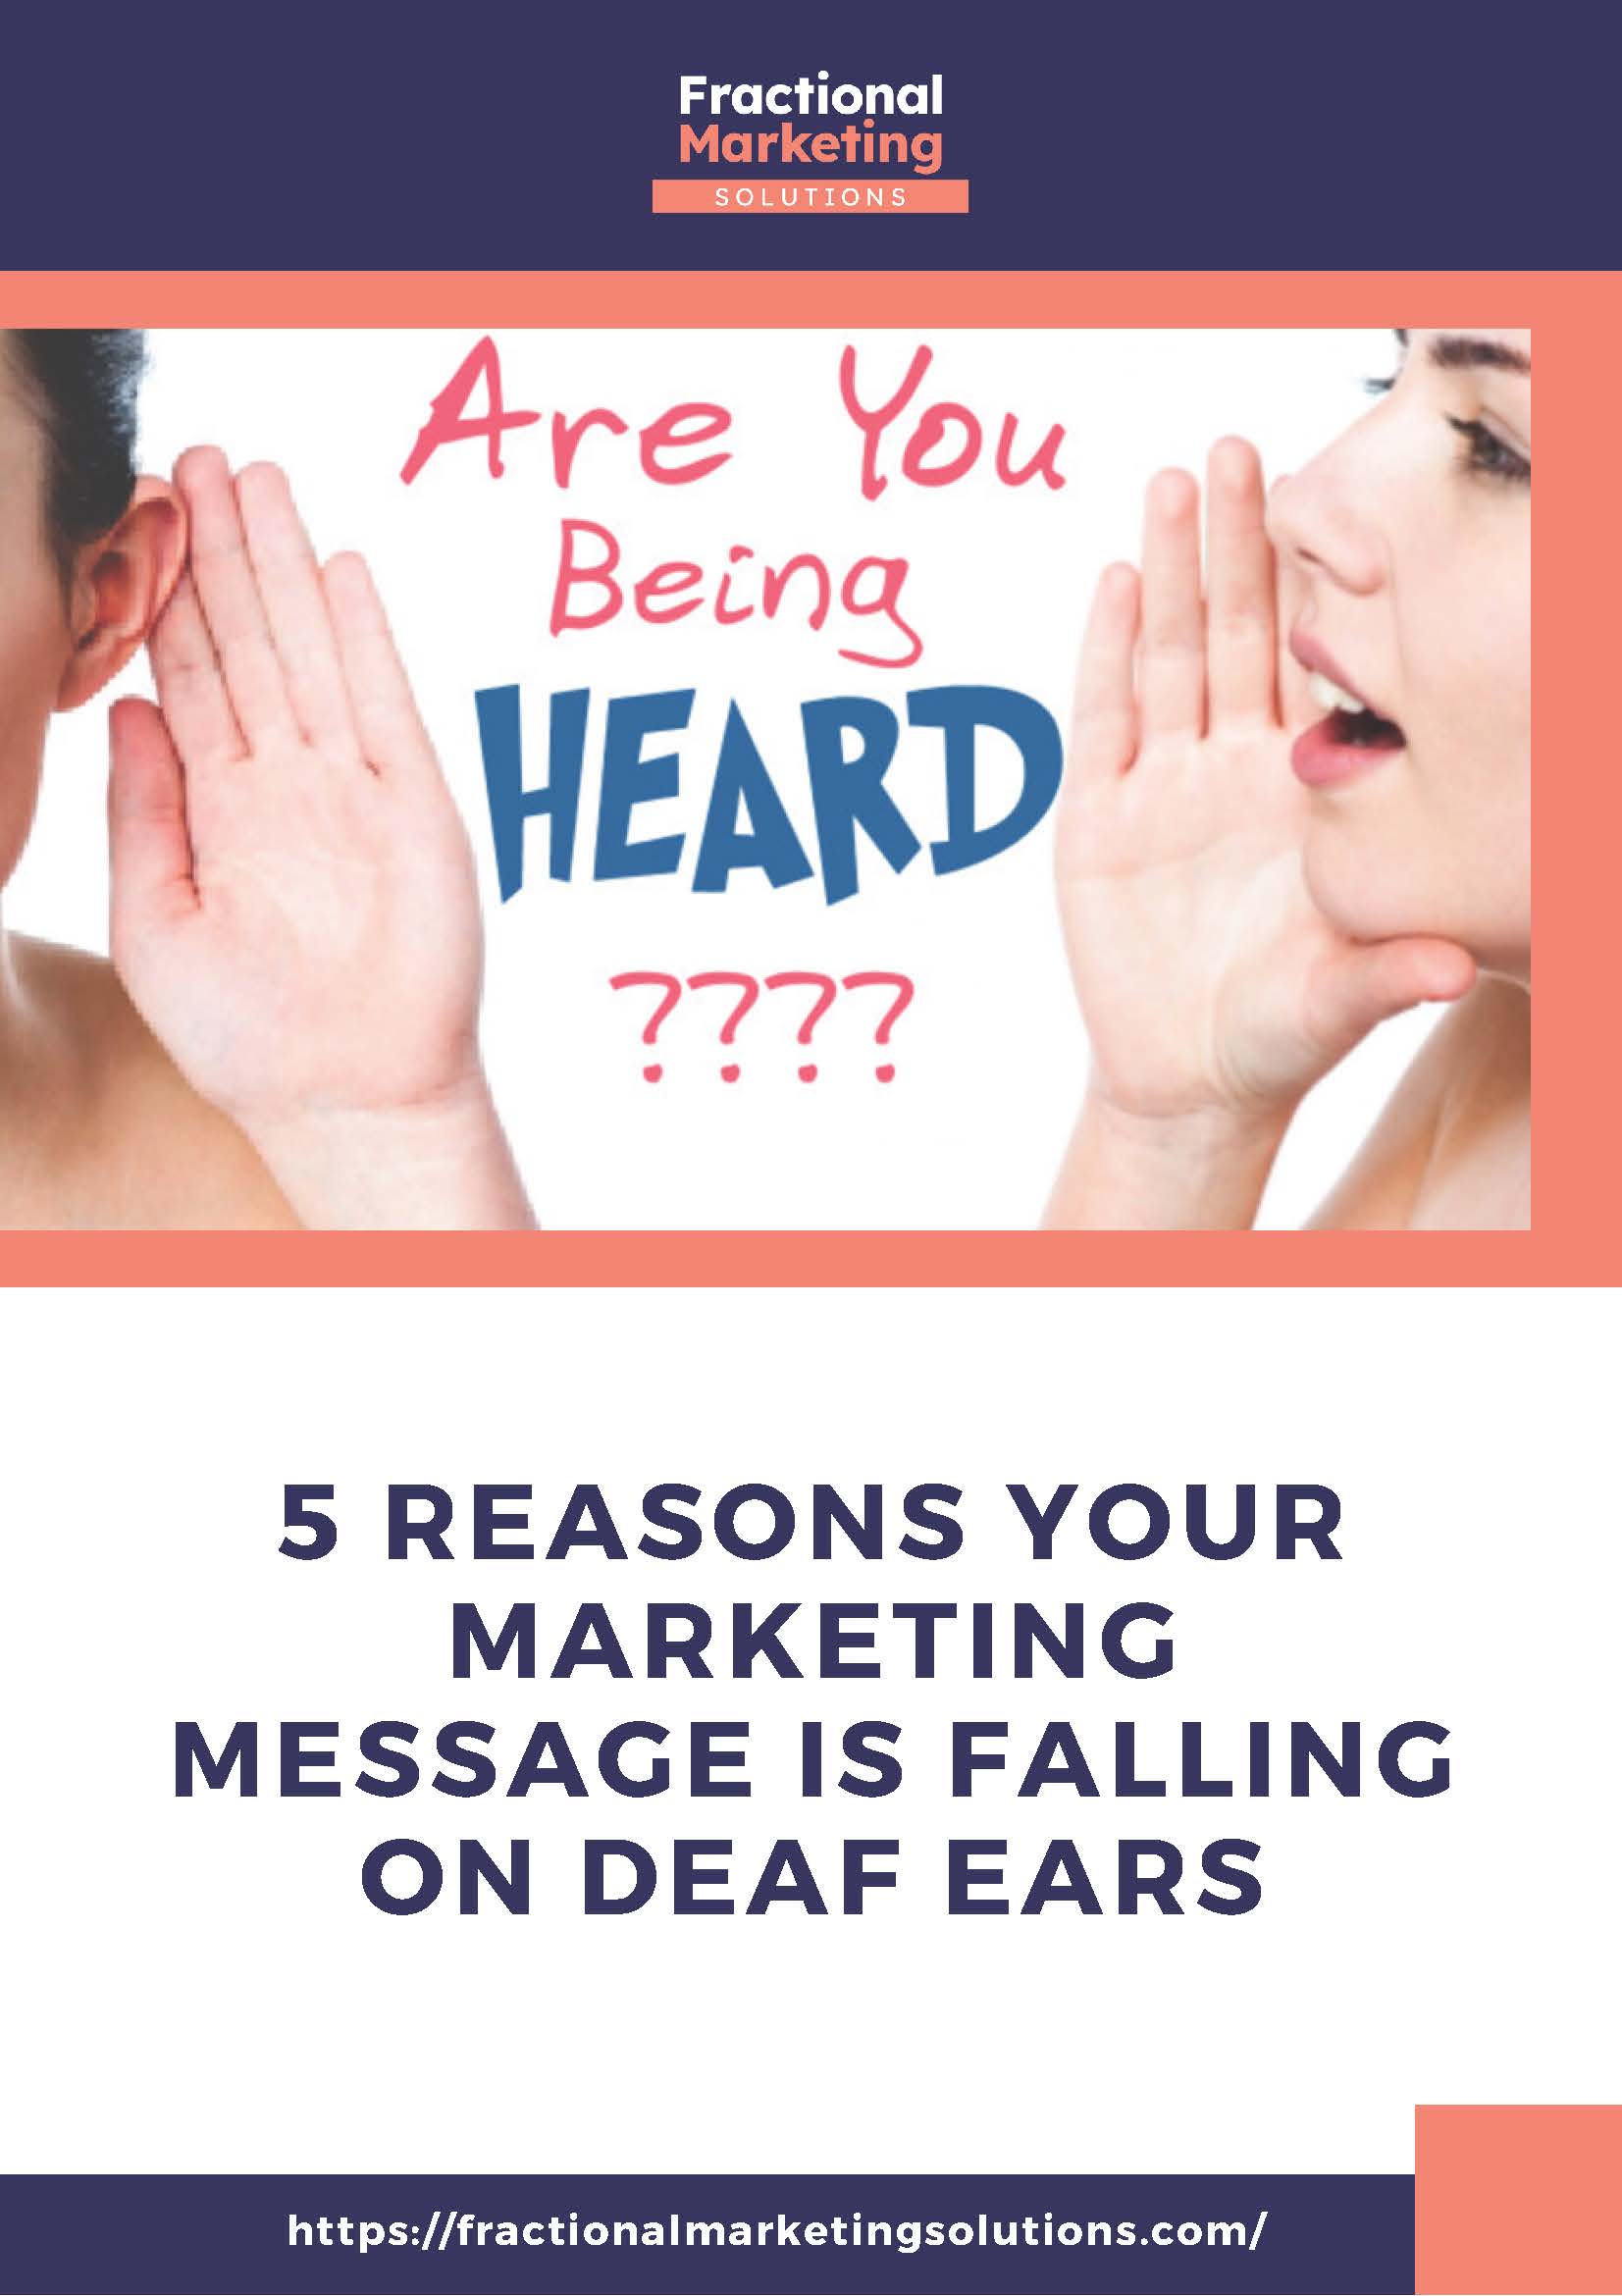 5 Reasons Your Marketing Message is Falling on Deaf Ears